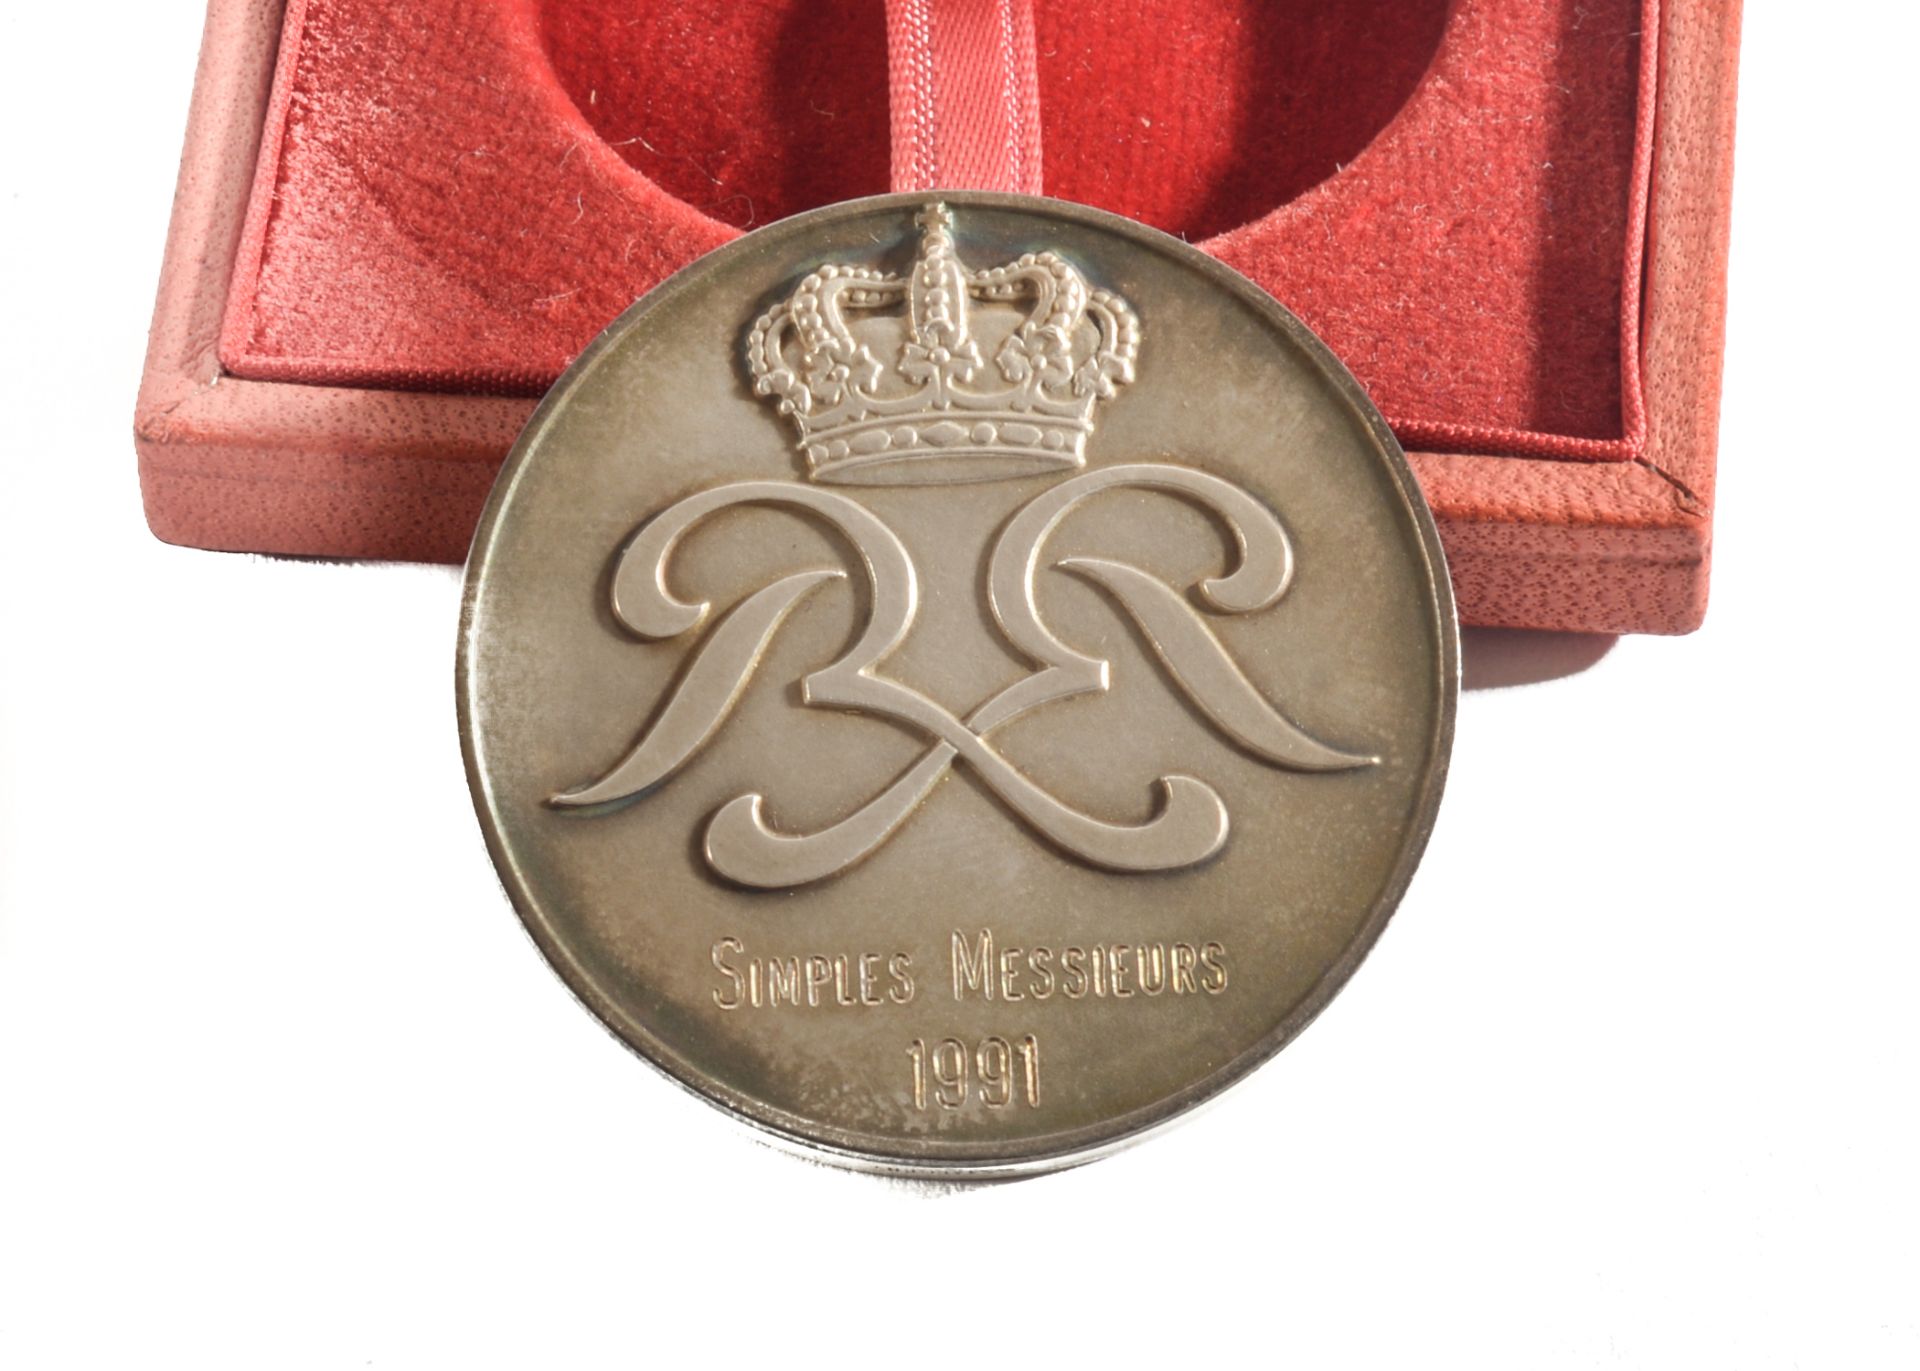 A Cast Medal, 40mm in diameter, bearing a Relief of Rainier III Prince De Monaco and his Head on - Image 2 of 2